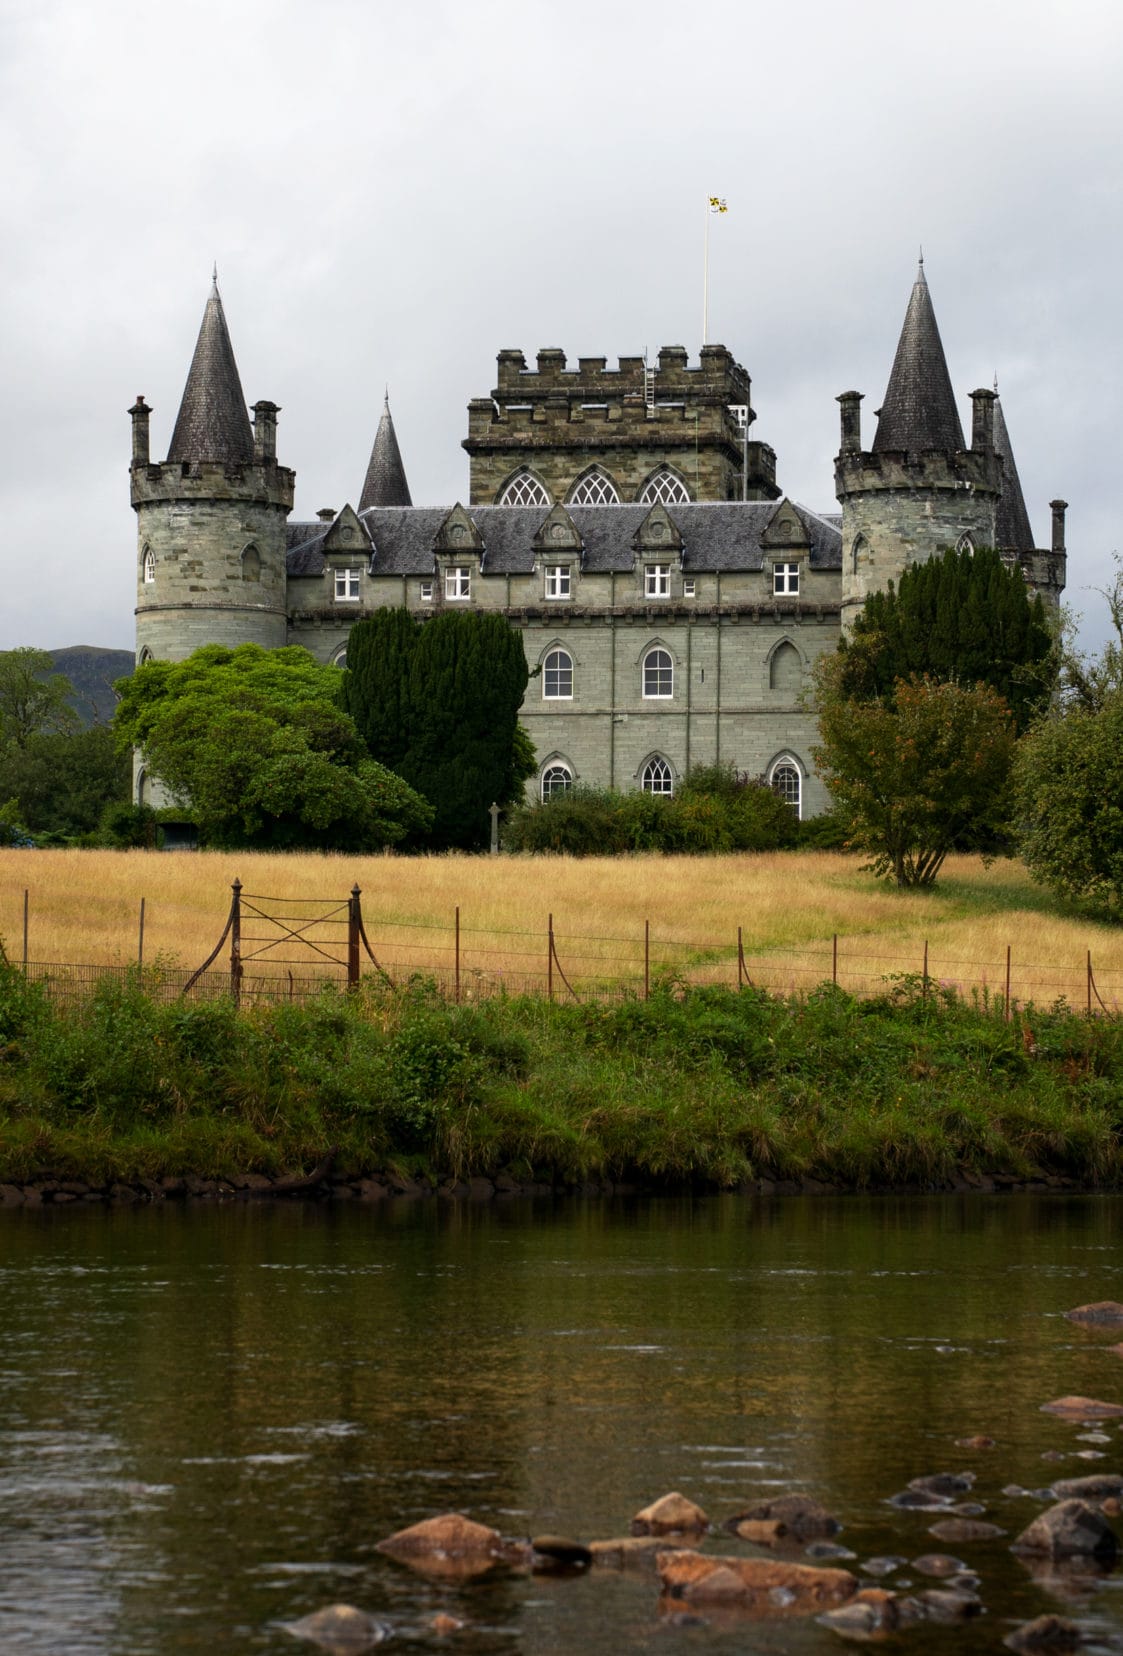 Inveraray castle with pointed turrets